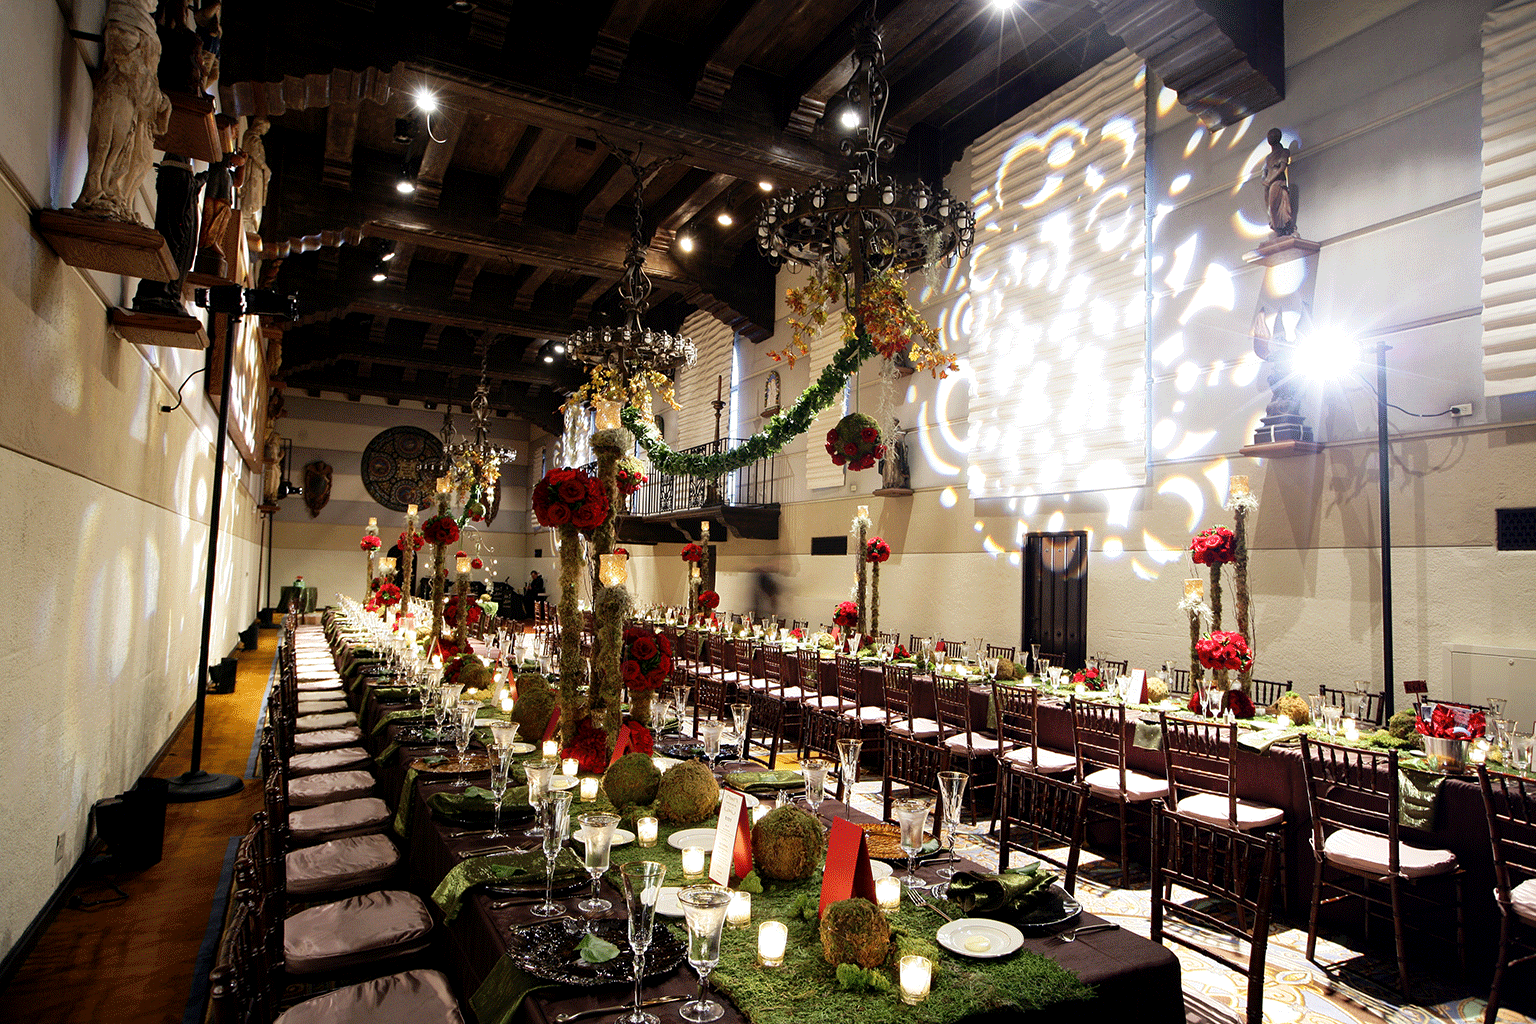 Decorated Mission Inn Galeria ballroom with tables and seating